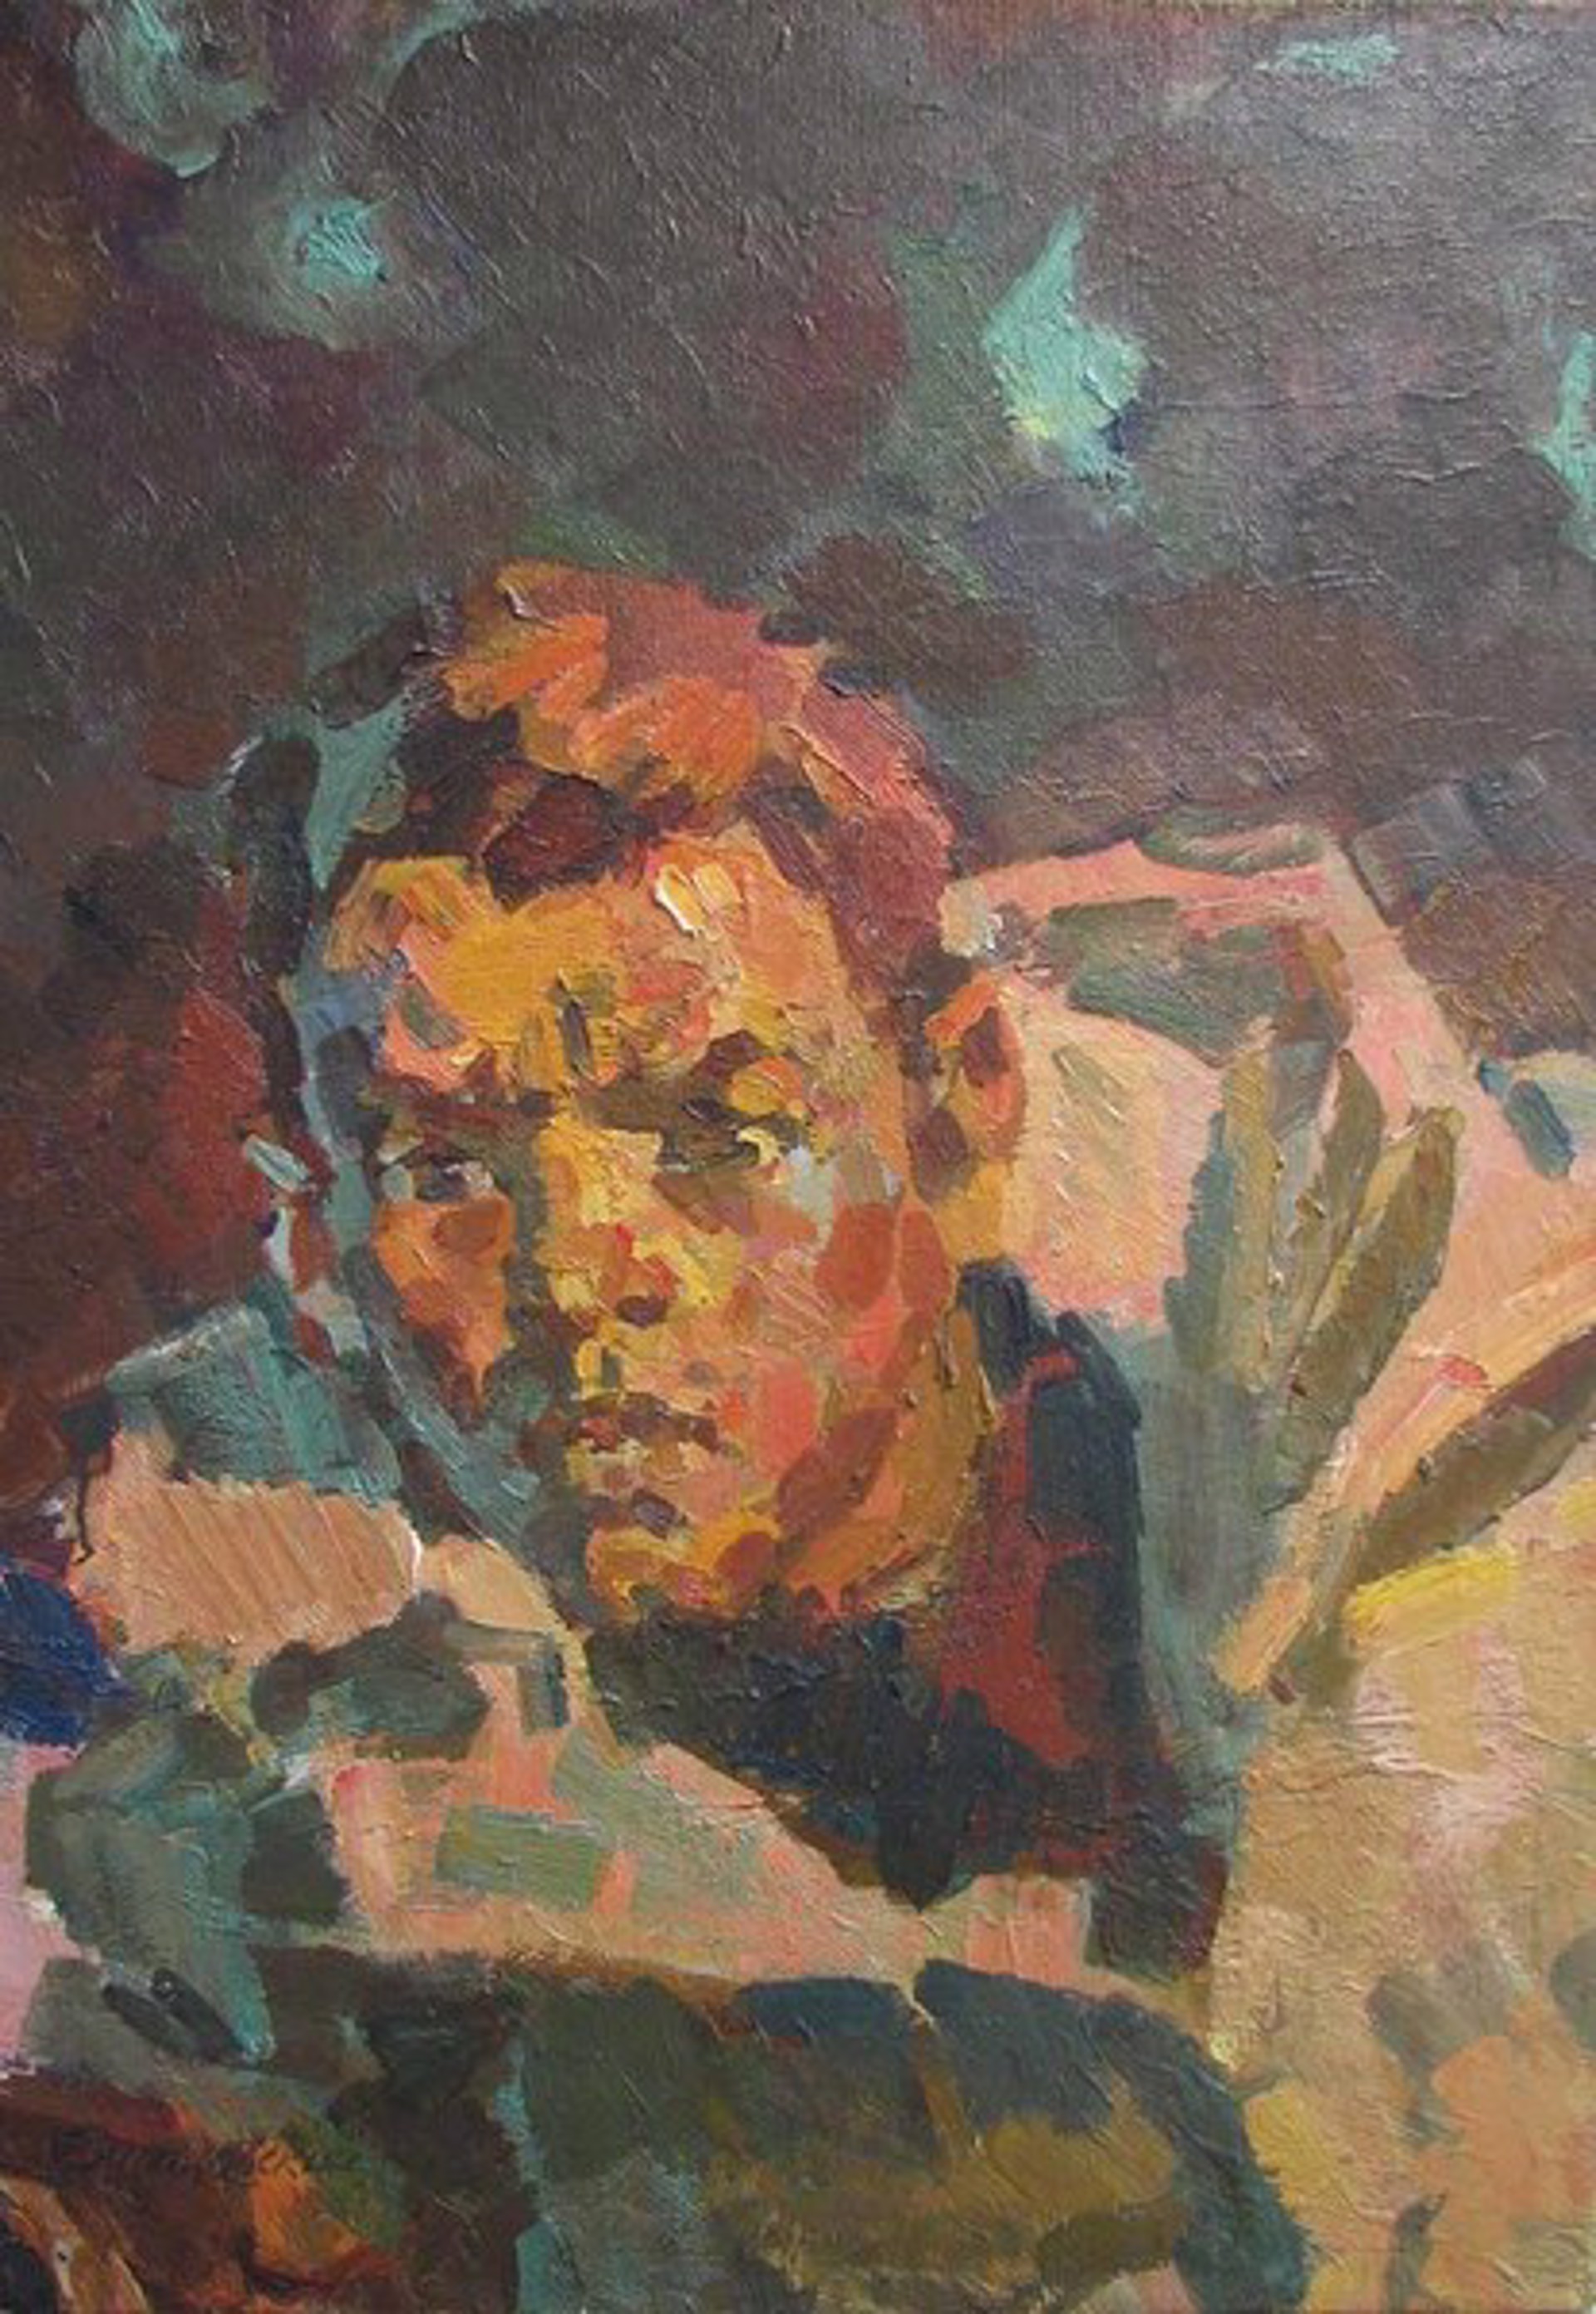 Study for 'To Live or Die' by Lev Vitkovsky